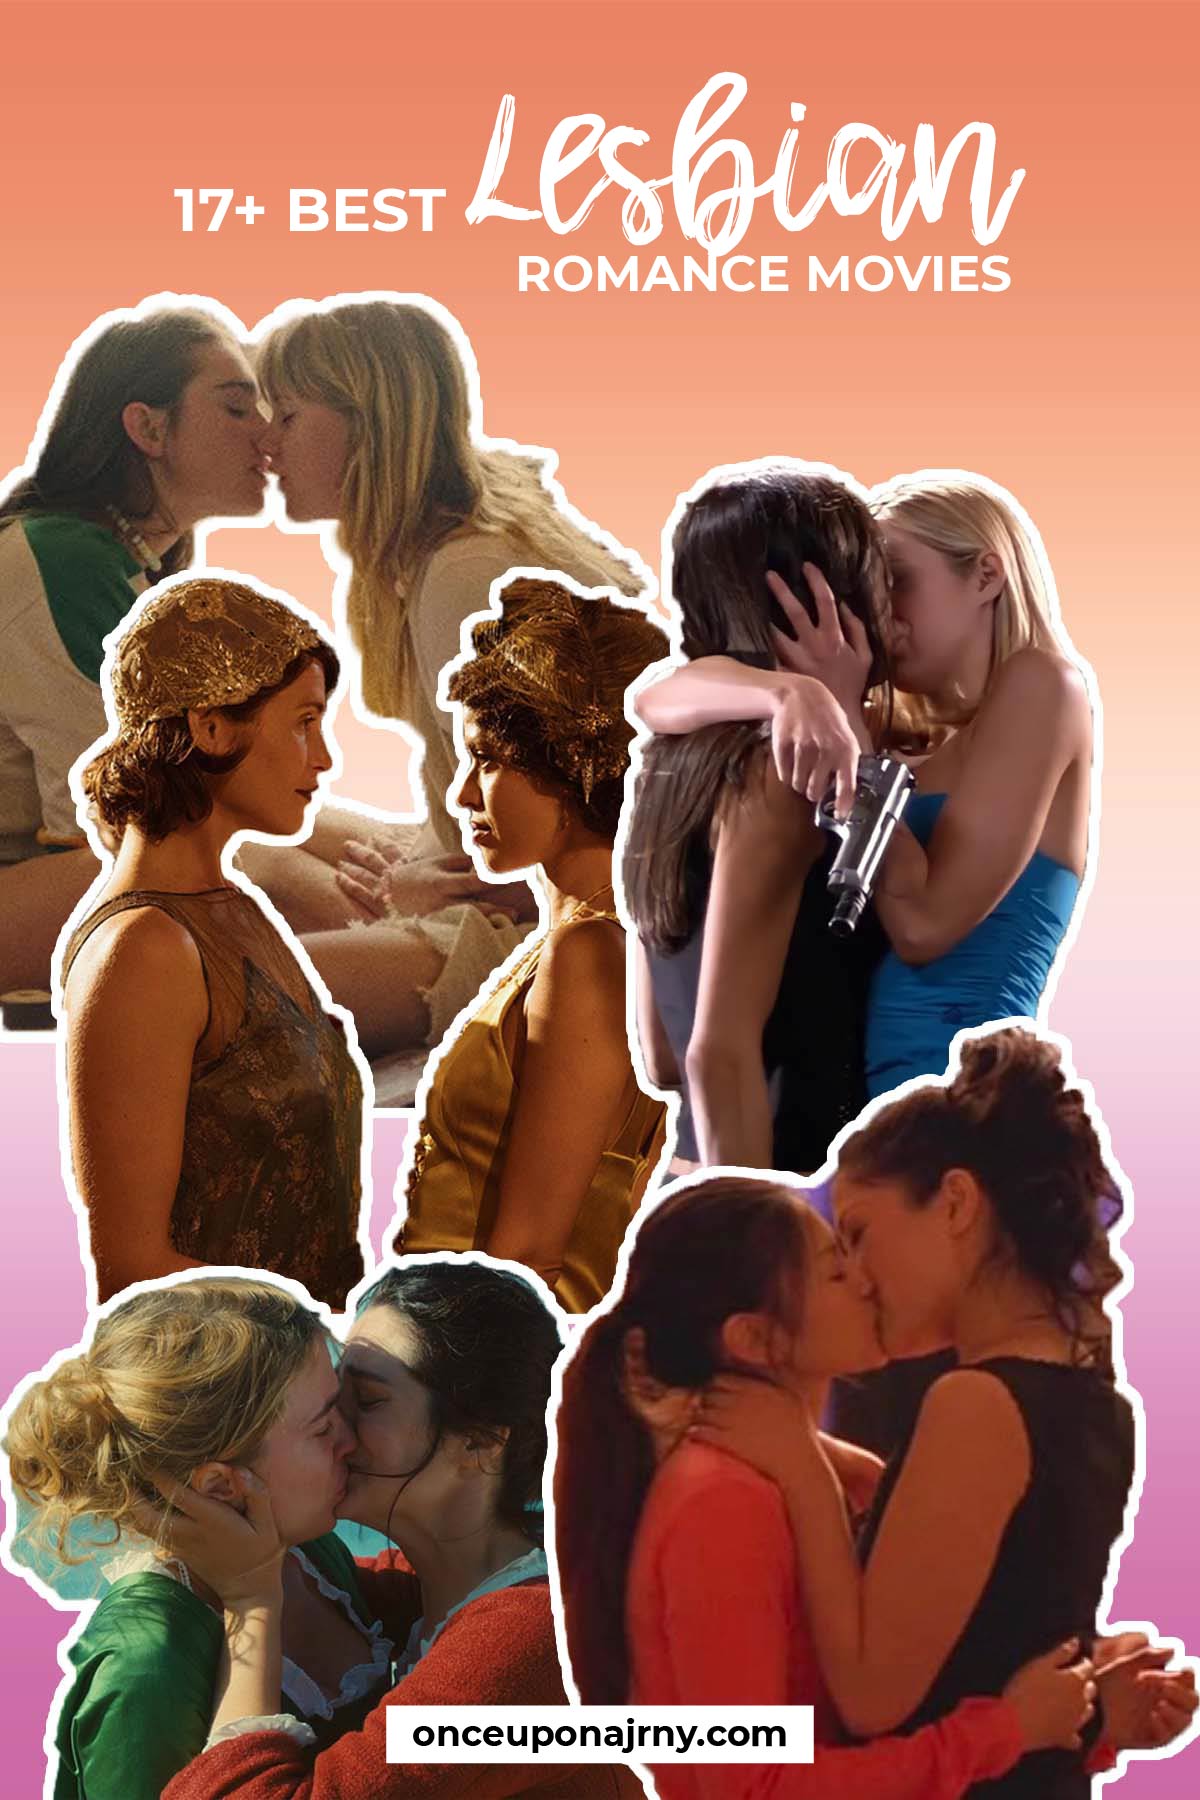 andrea valverde recommends watch free lesbien movies pic